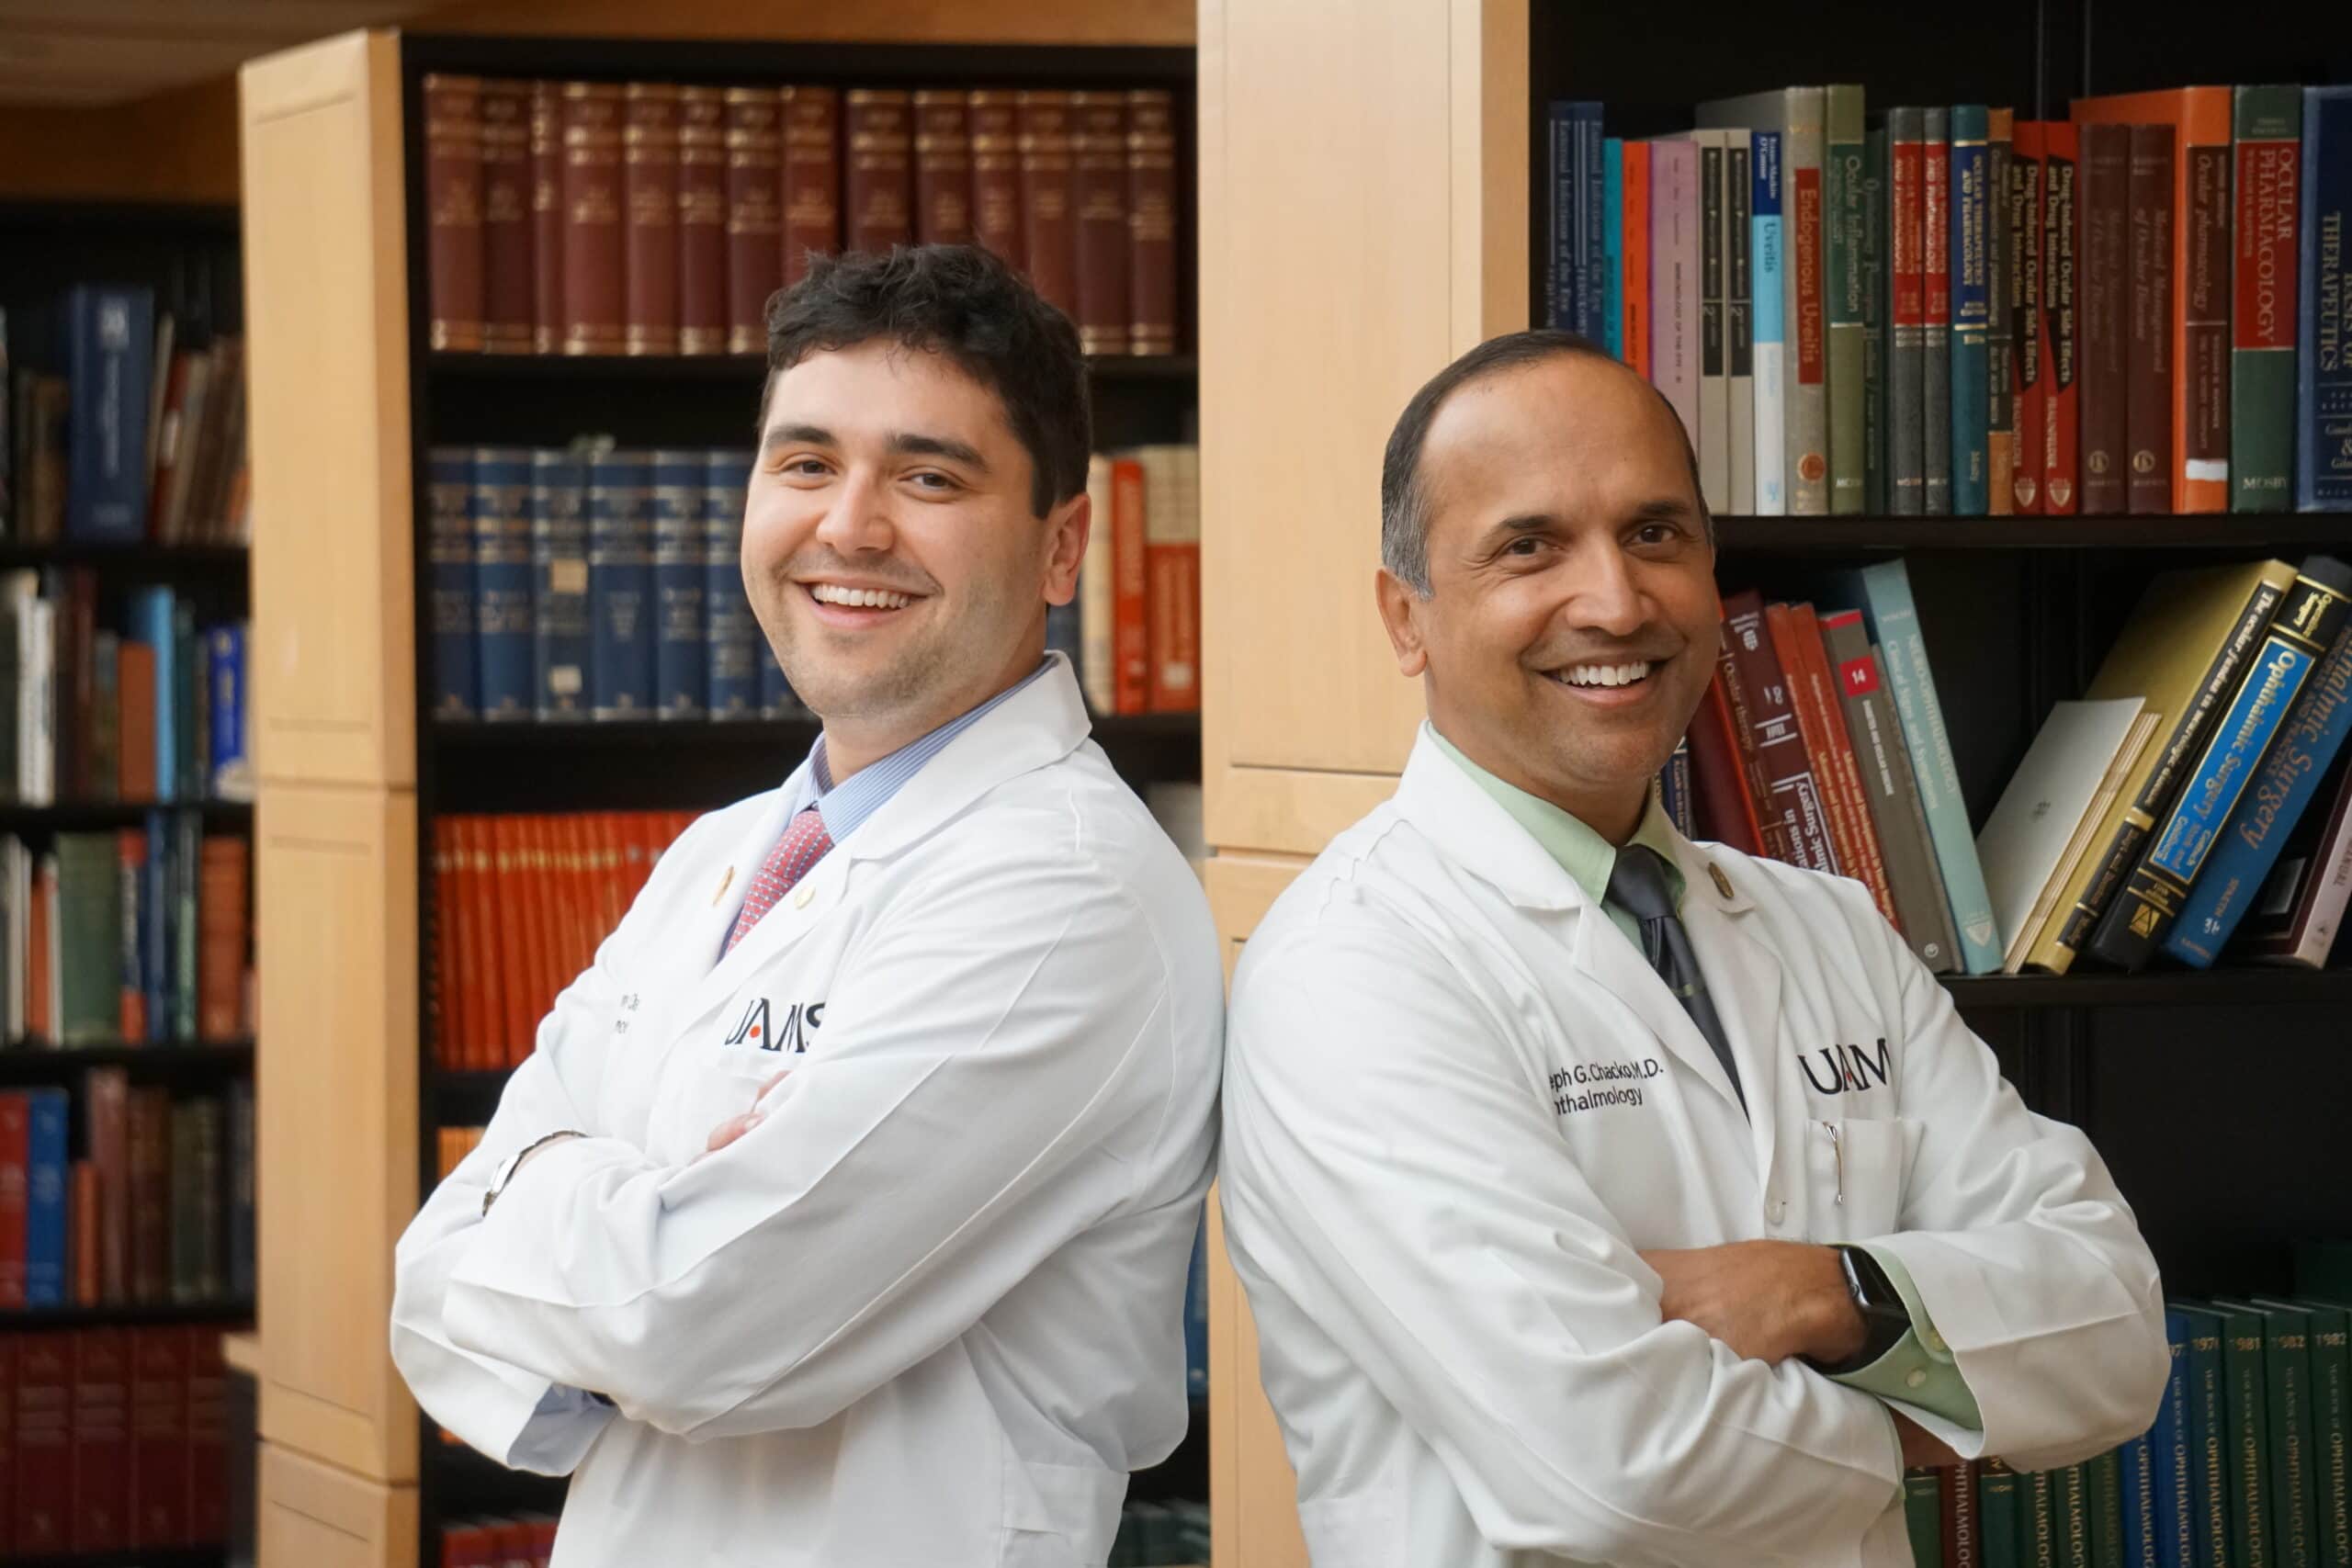 Ophthalmology is a family affair for resident Tony Chacko, M.D., (left) and his father, Joseph Chacko, M.D., director of neuro-ophthalmology at the UAMS Harvey & Bernice Jones Eye Institute.